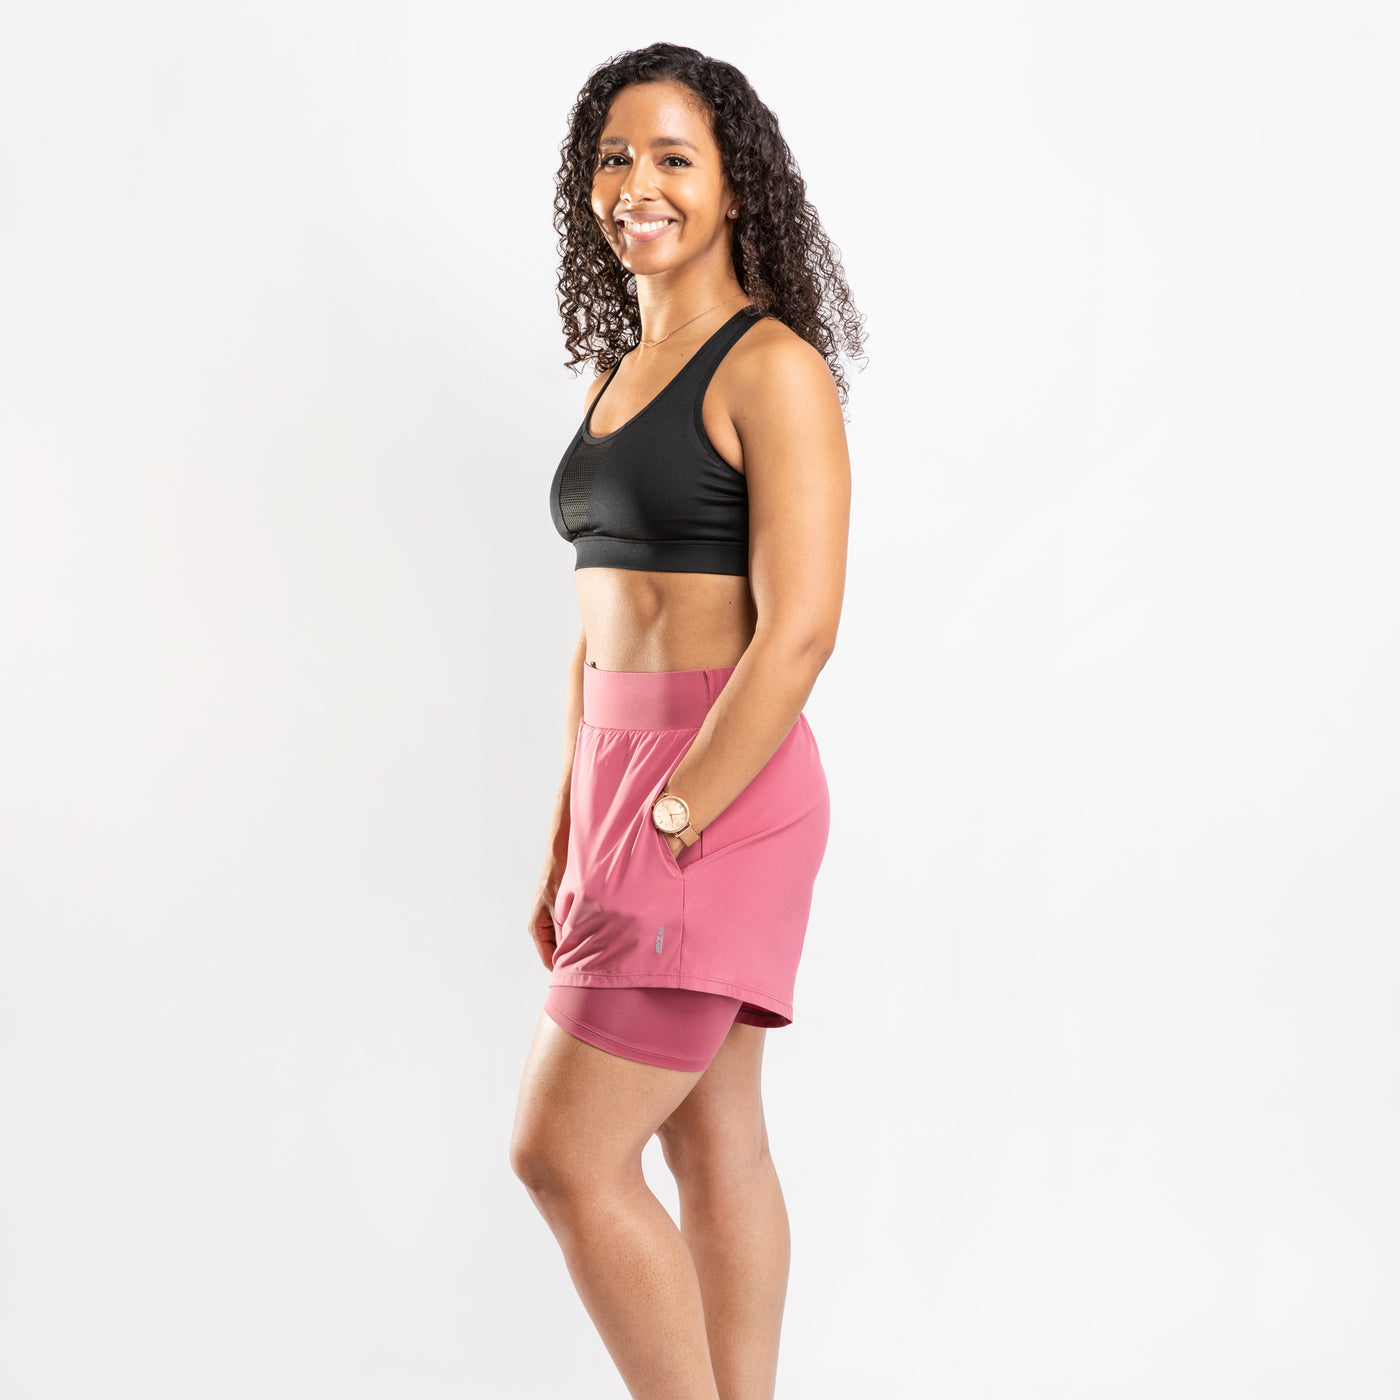 NonZero Gravity Women’s ZinTex Eco High-Rise Running Shorts made with Recycled Polyester & Spandex in Berry